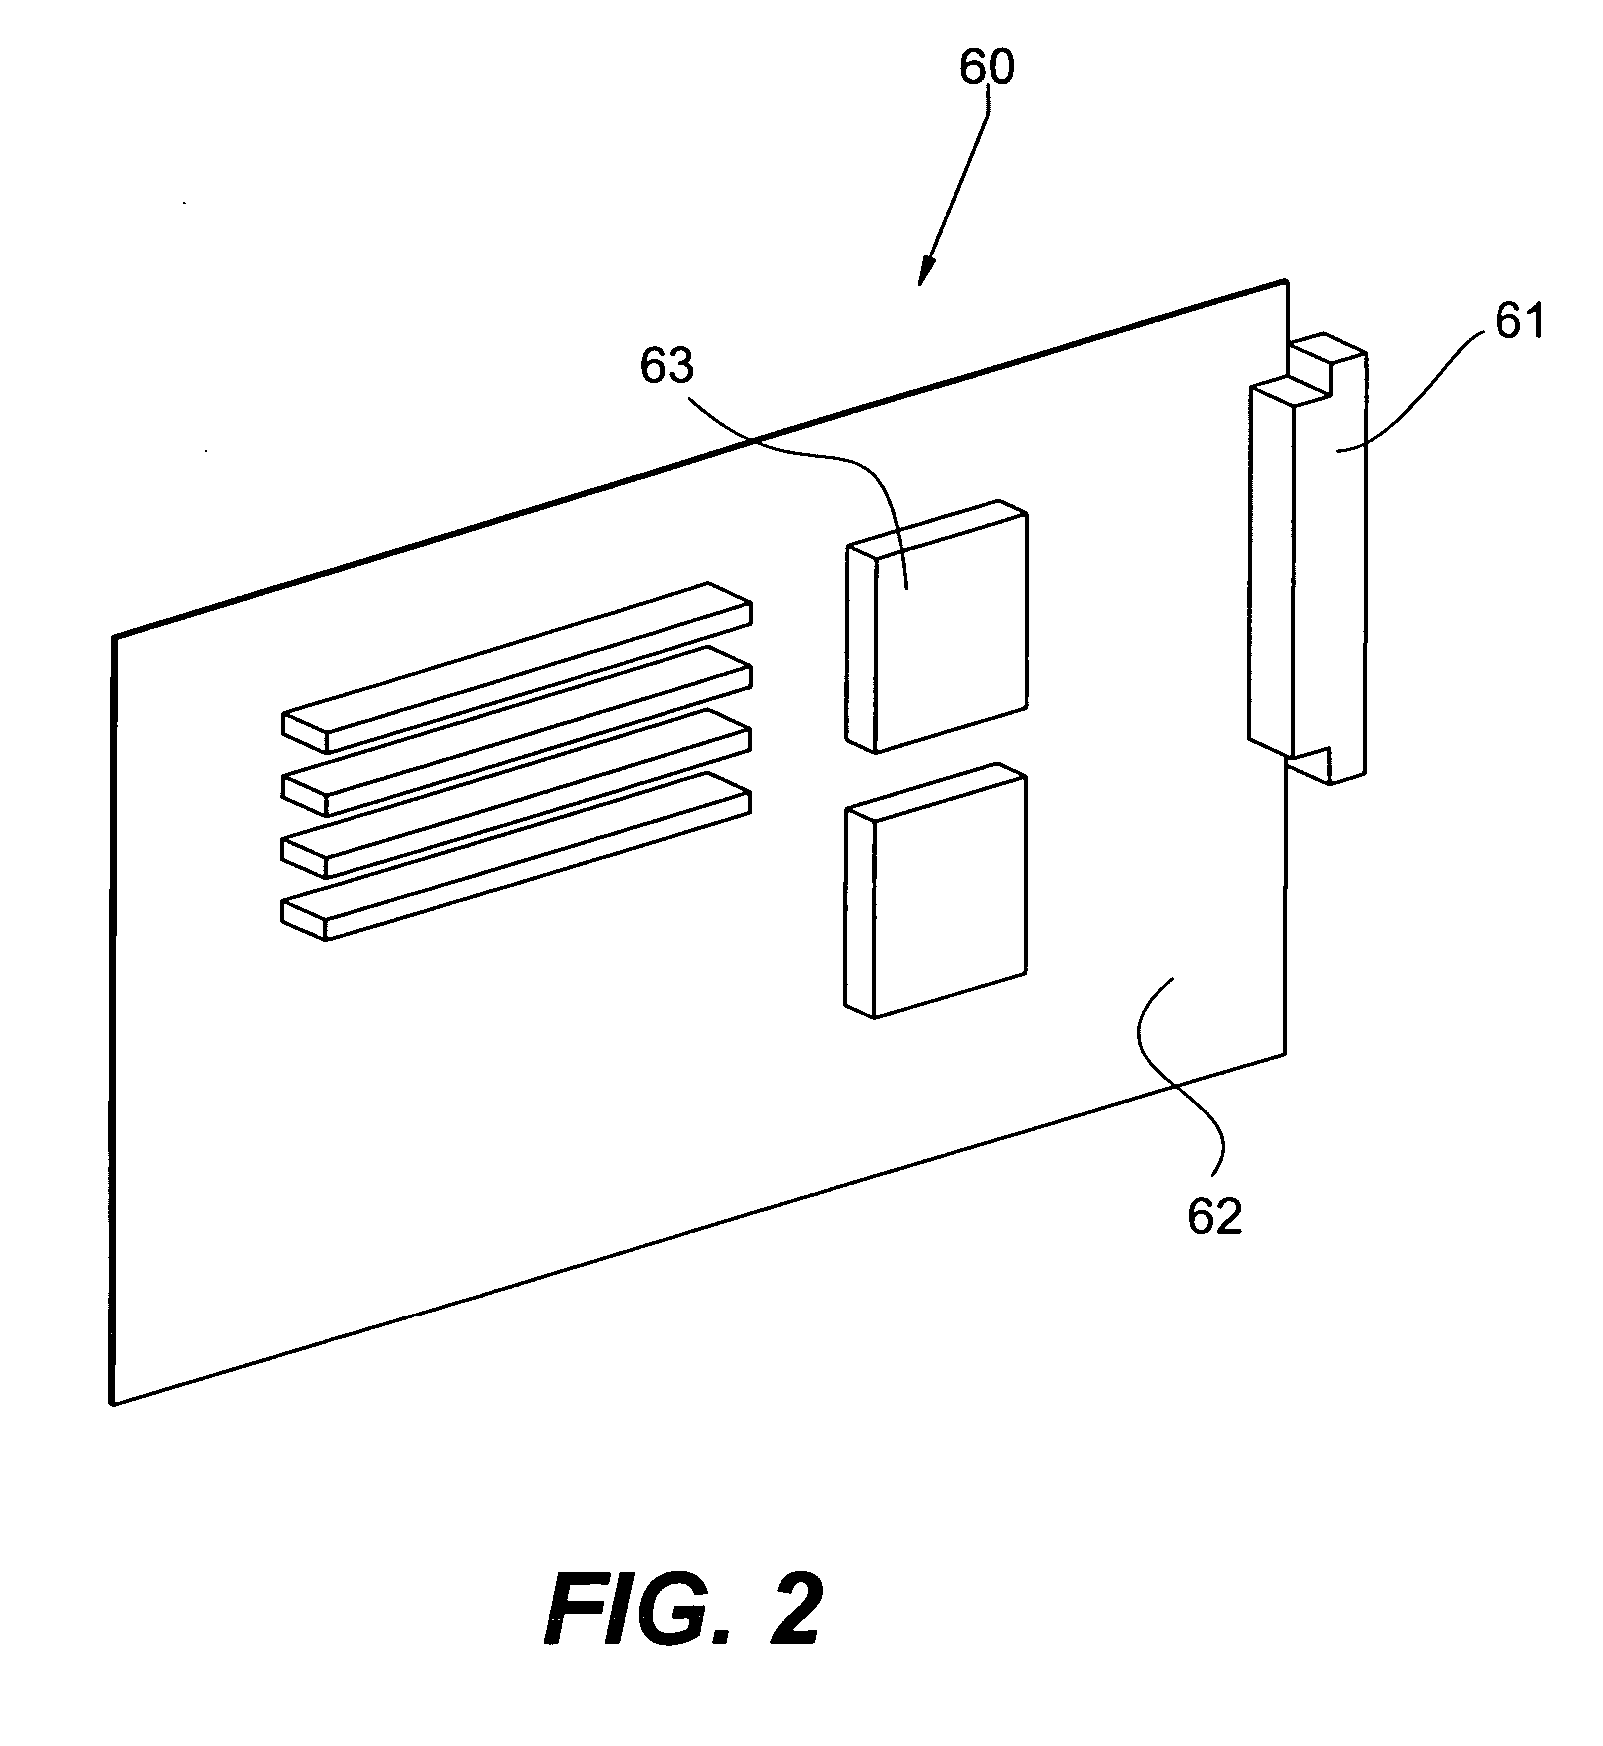 Multi-chamber spray cooling system